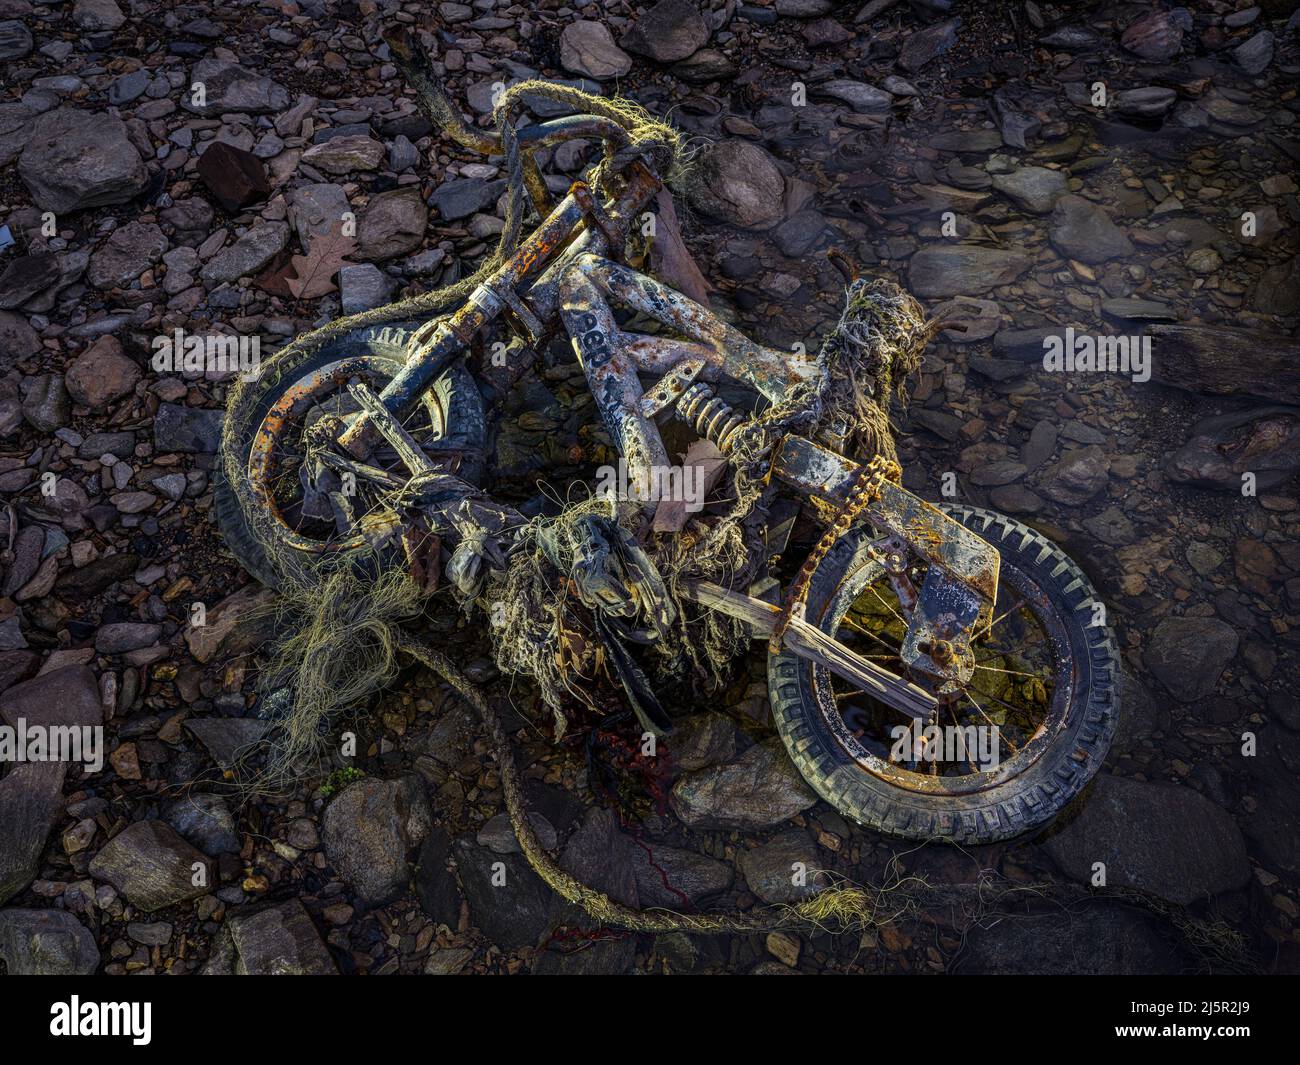 Old rusty bicycle washed up on side of river, Pennsylvania, USA Stock Photo